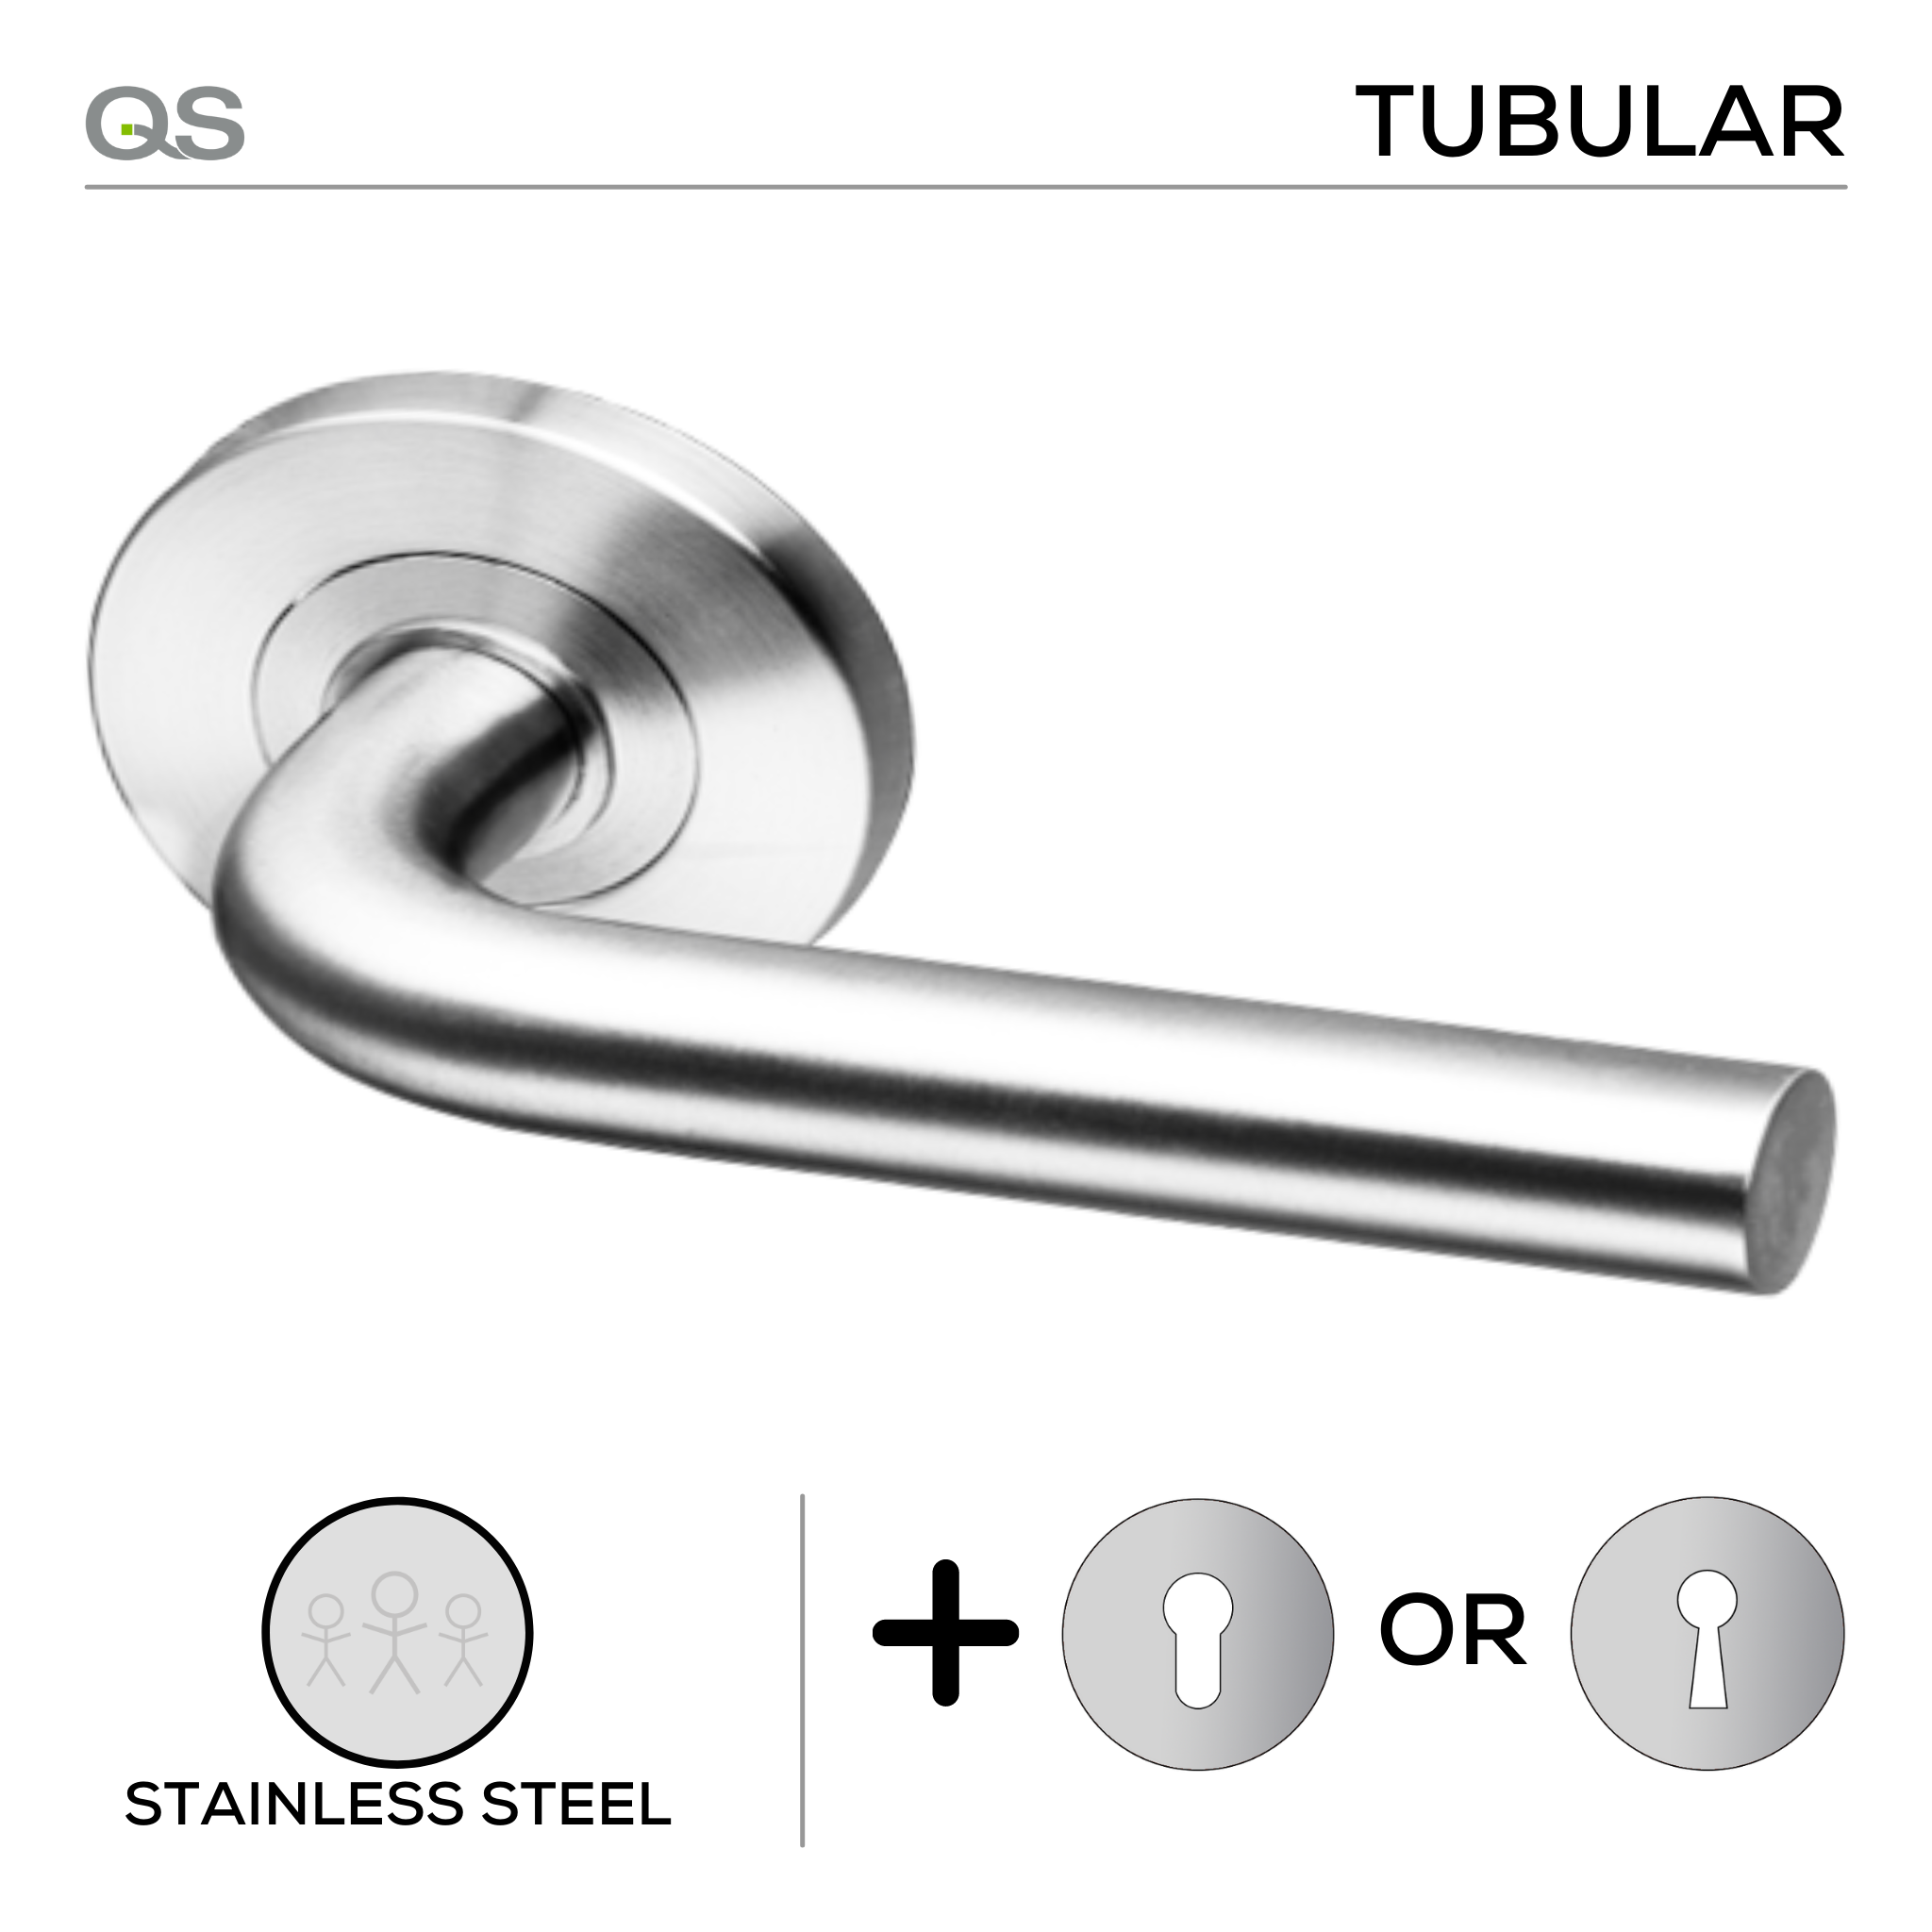 Coupé Oslo -Rose, Lever Handles, Tubular, Round Rose, With Escutcheons, Stainless Steel, QS